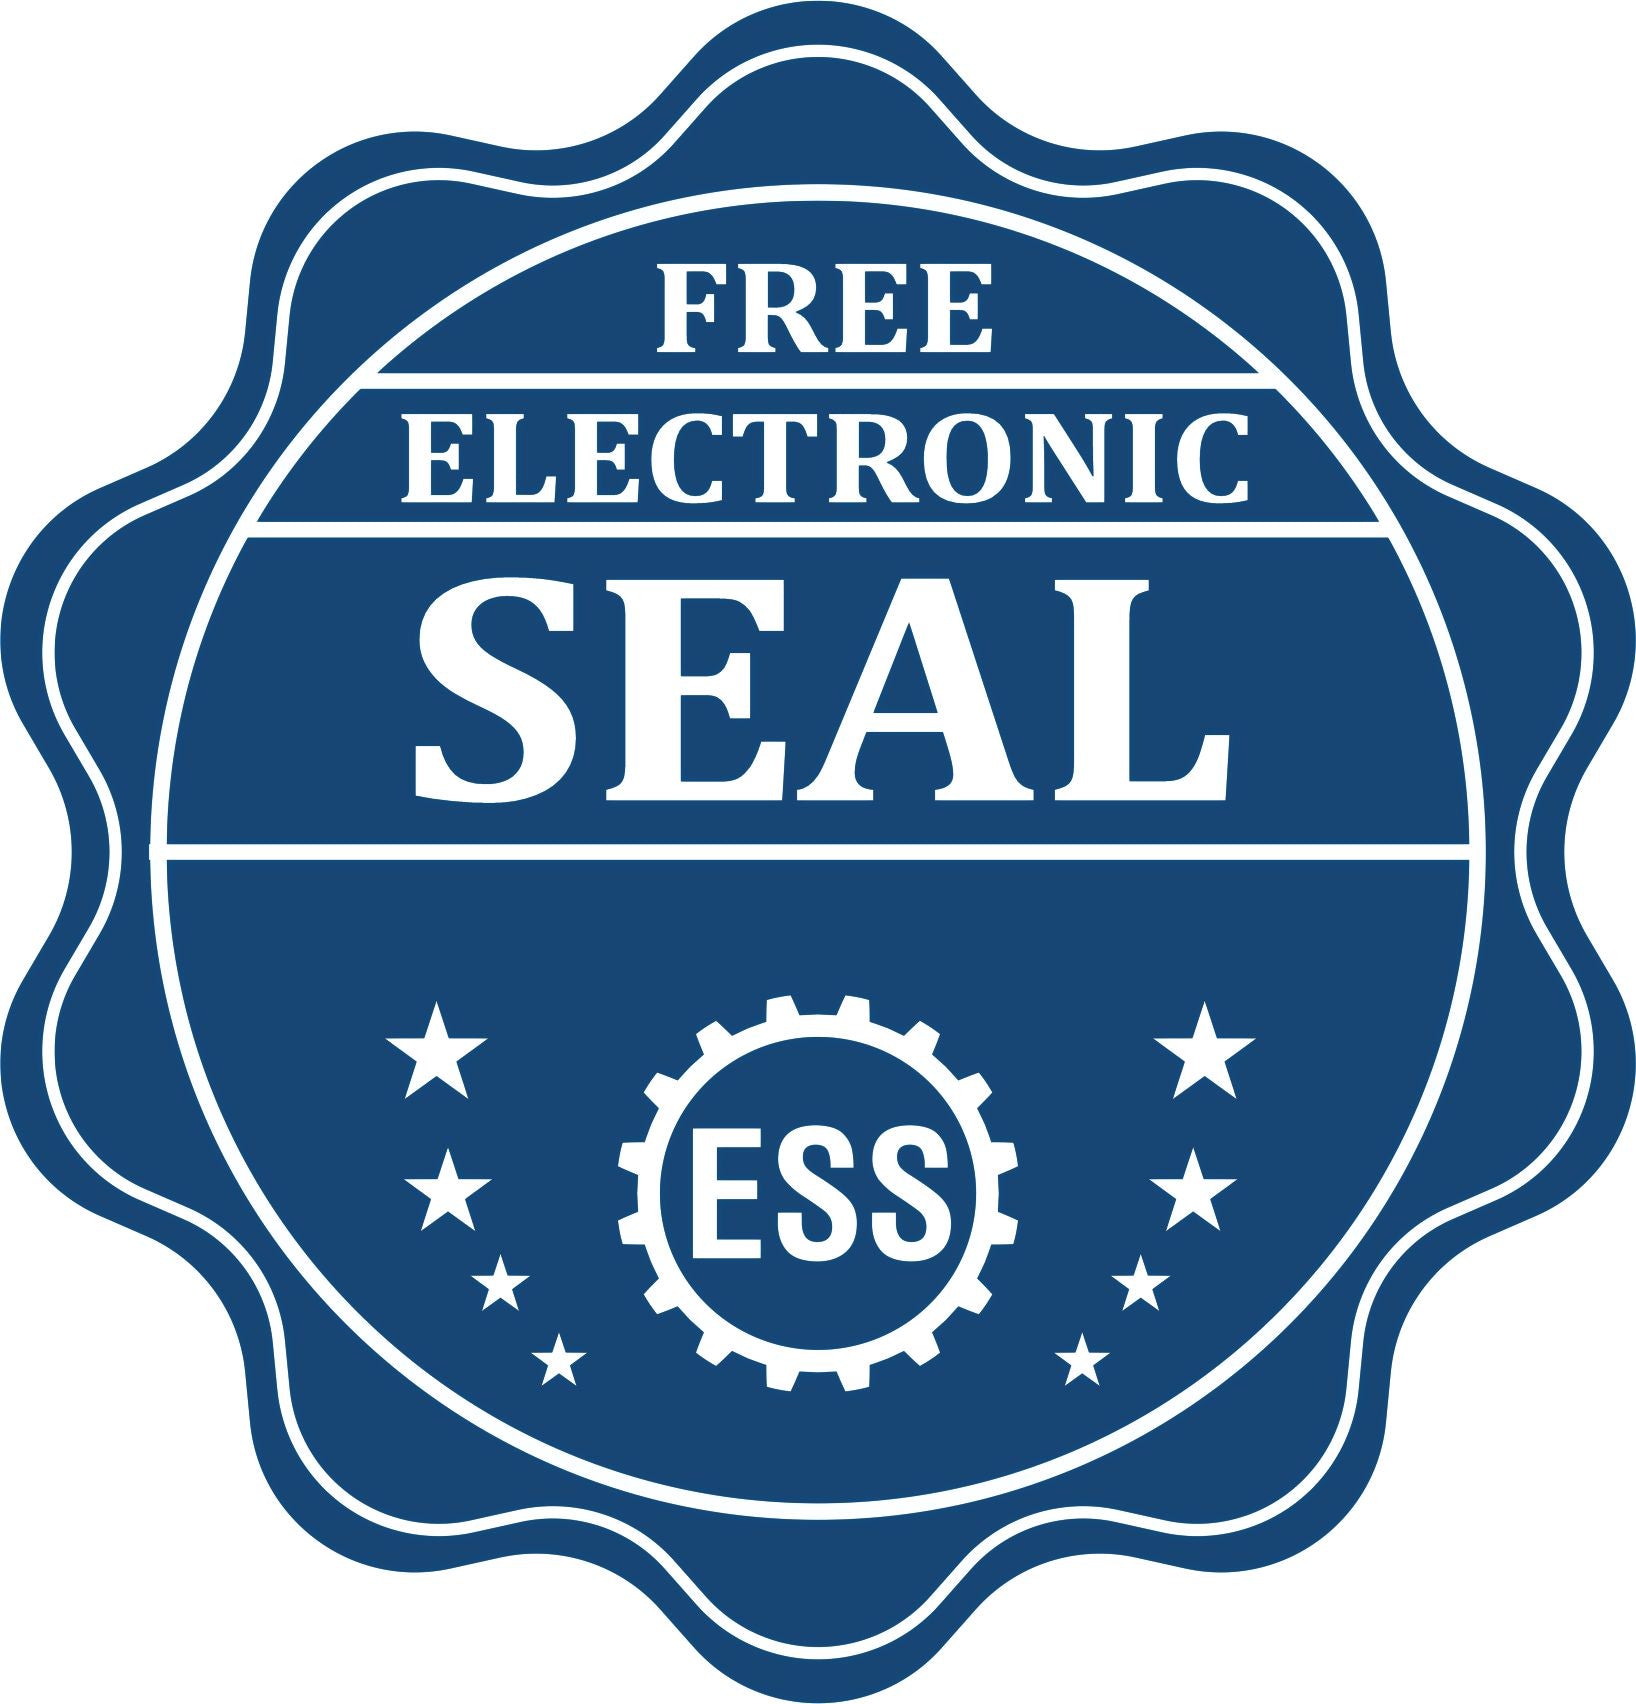 A badge showing a free electronic seal for the Gift South Carolina Landscape Architect Seal with stars and the ESS gear on the emblem.